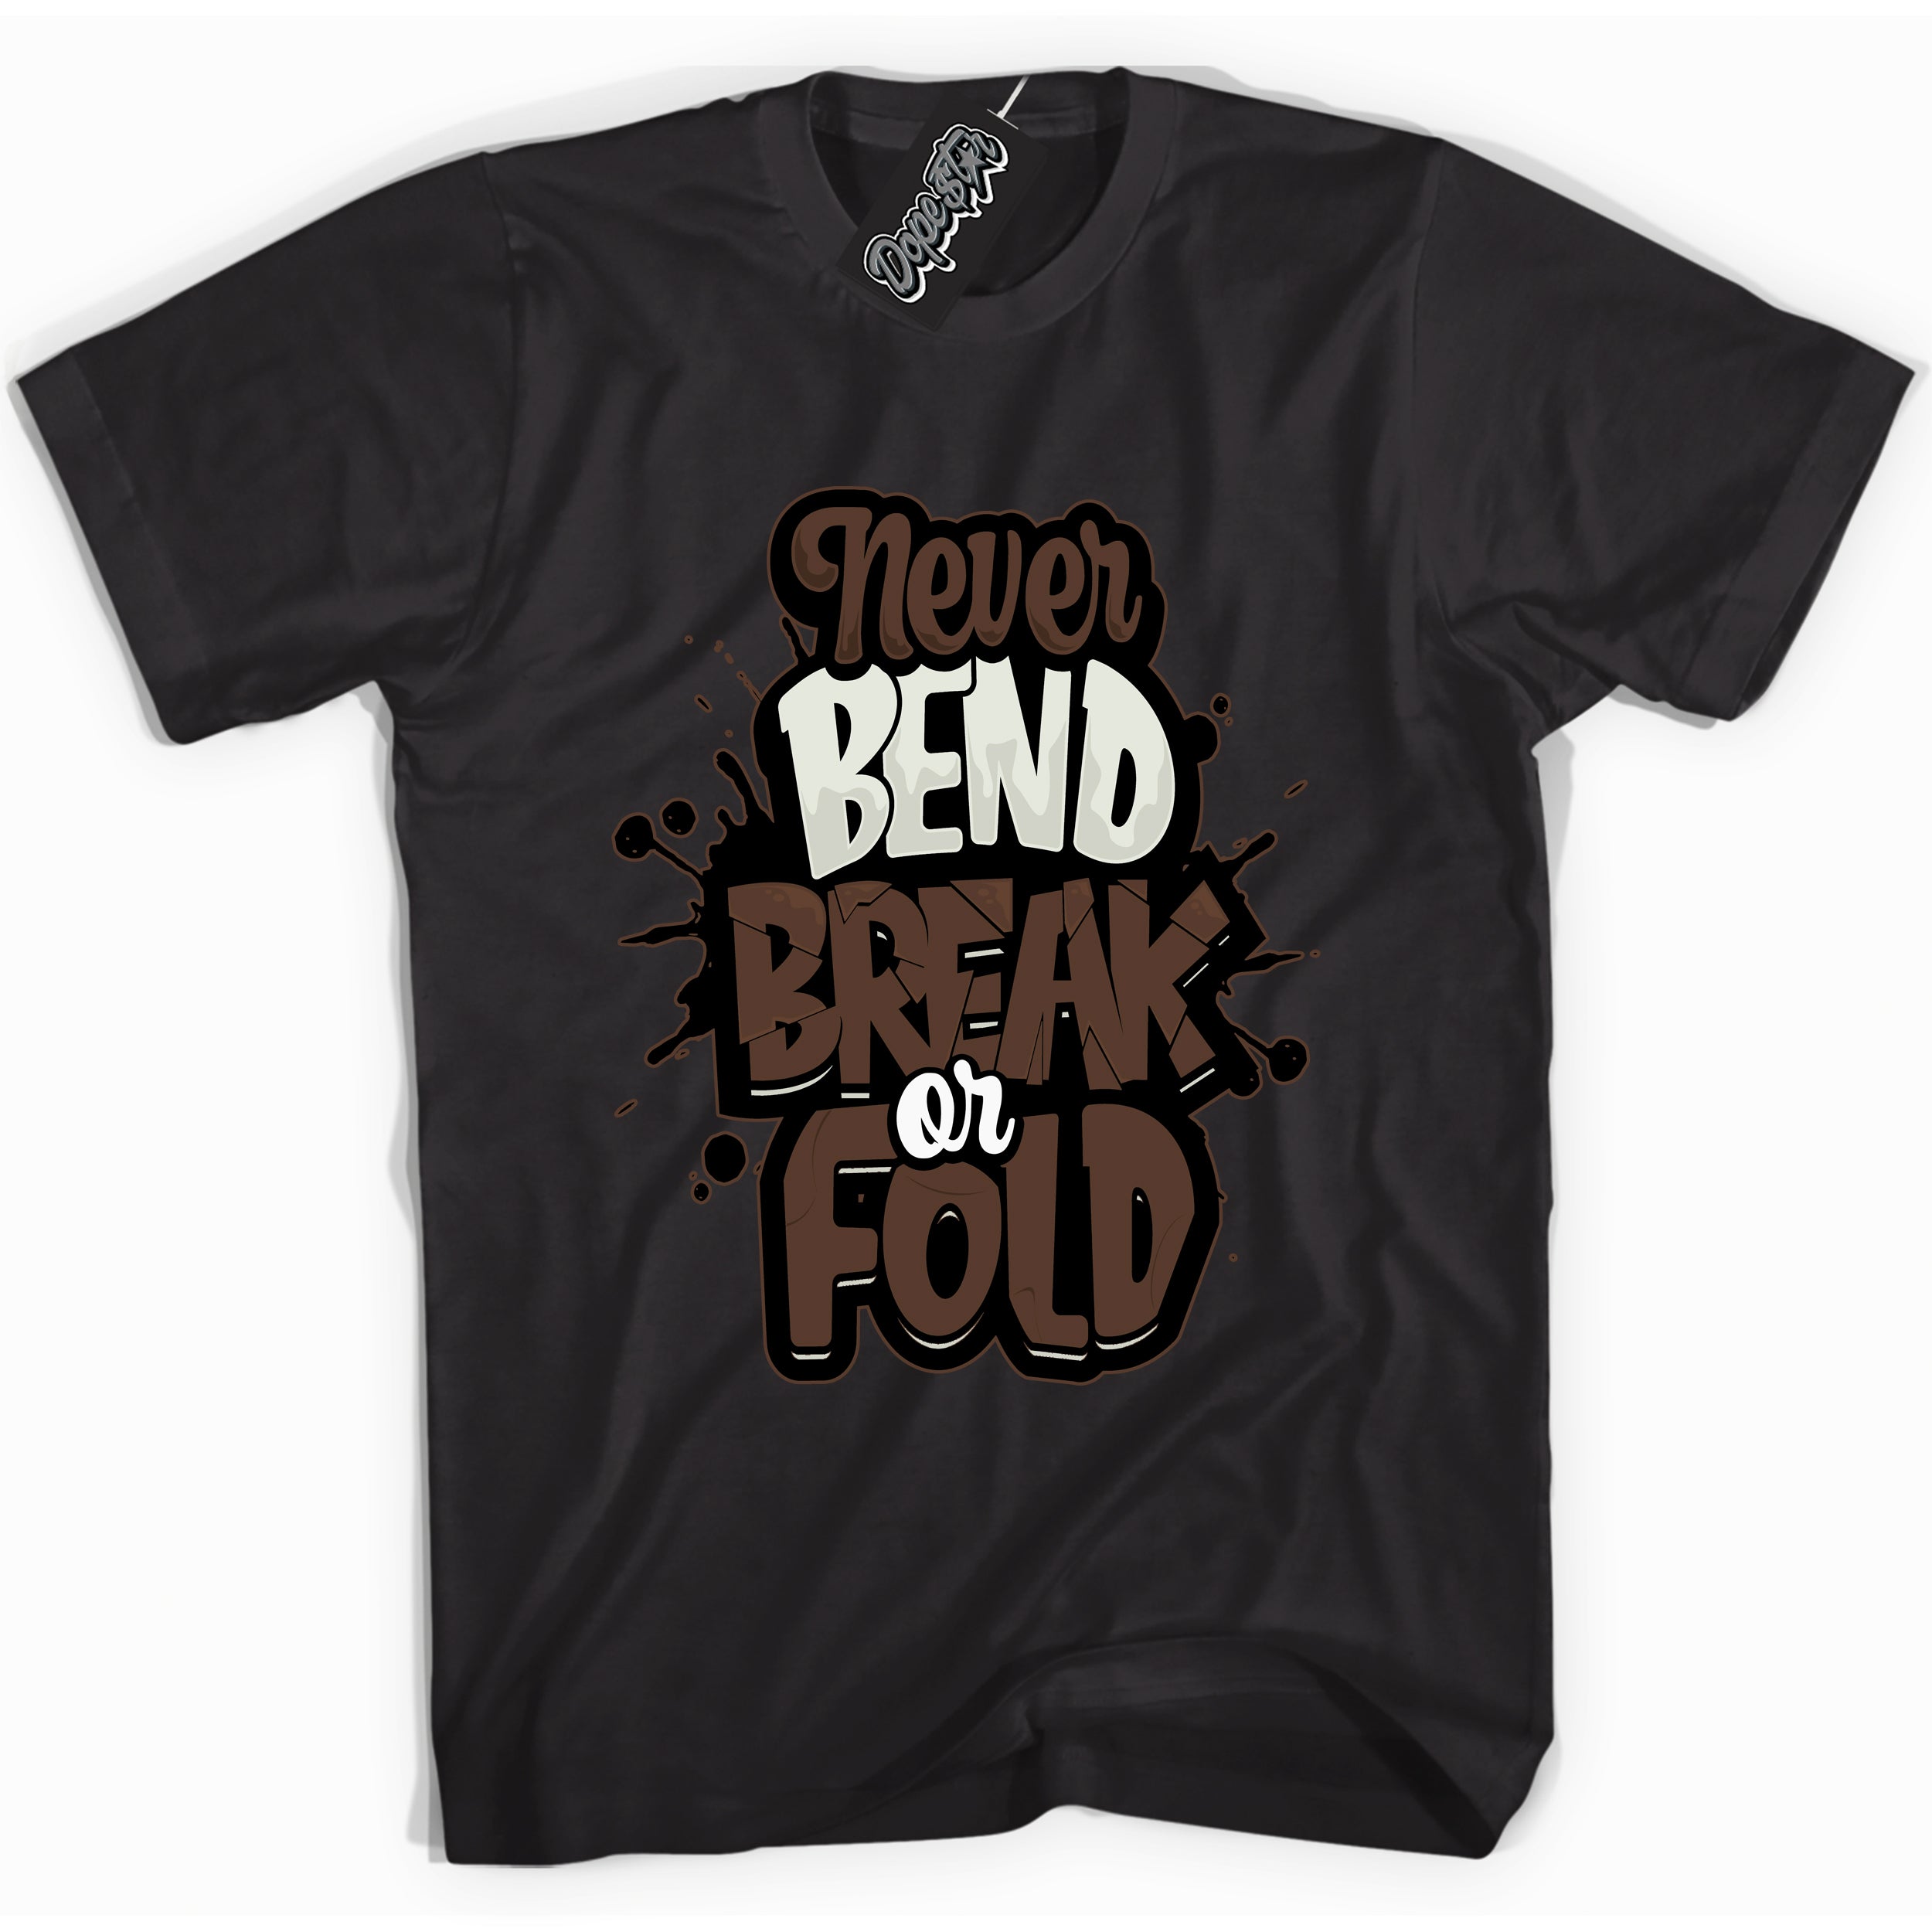 Cool Black graphic tee with “ Never Bend Break Or Fold ” design, that perfectly matches Palomino 1s sneakers 